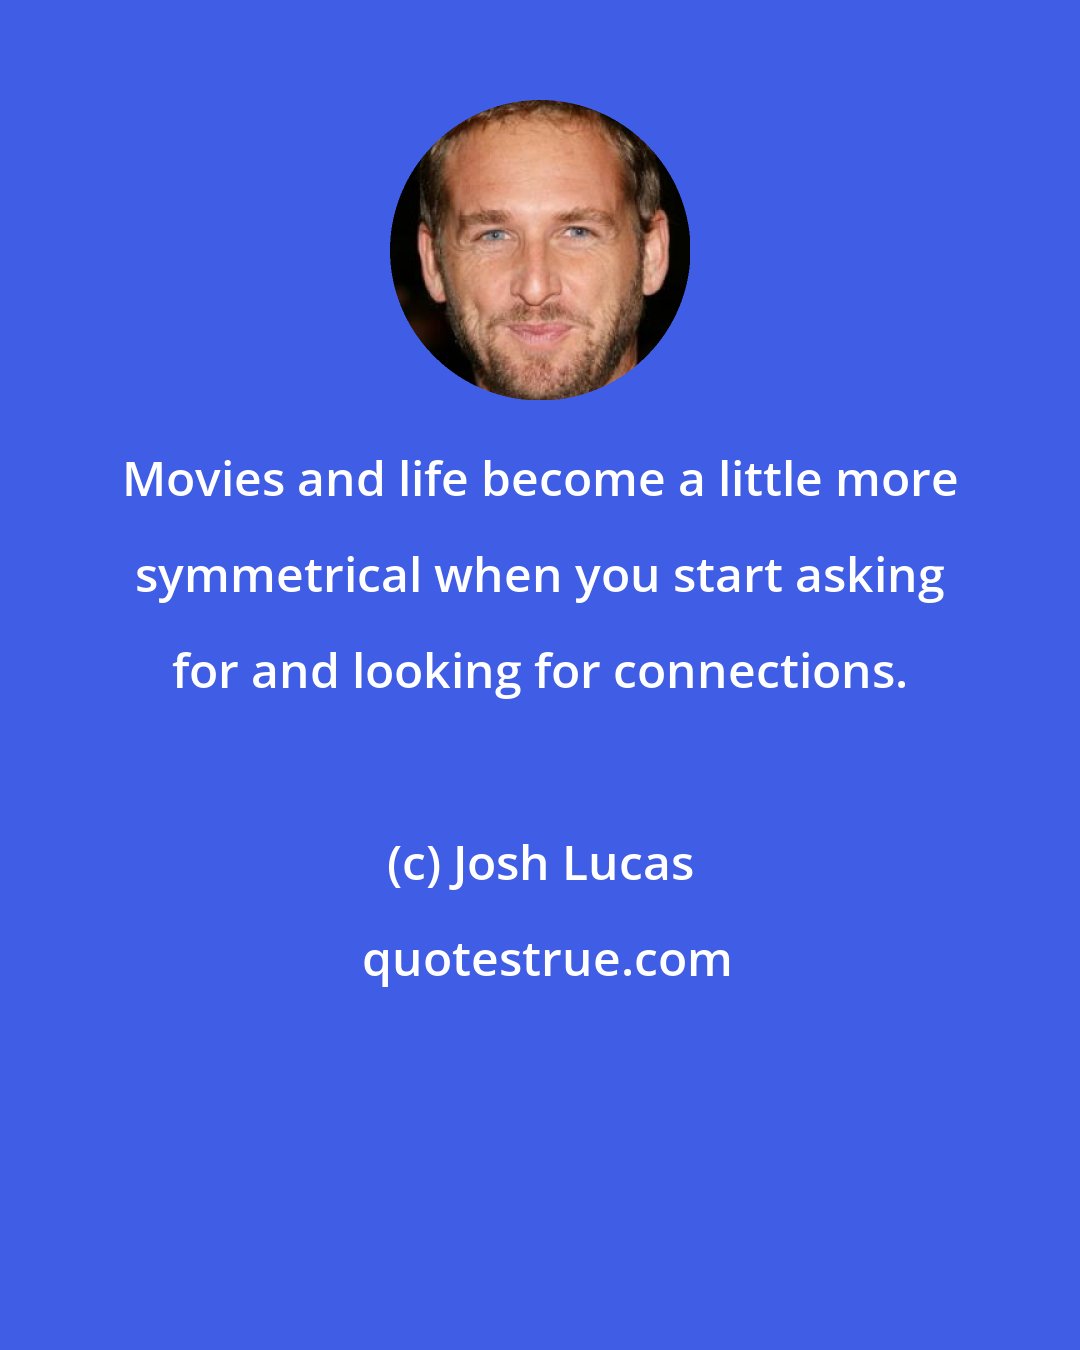 Josh Lucas: Movies and life become a little more symmetrical when you start asking for and looking for connections.